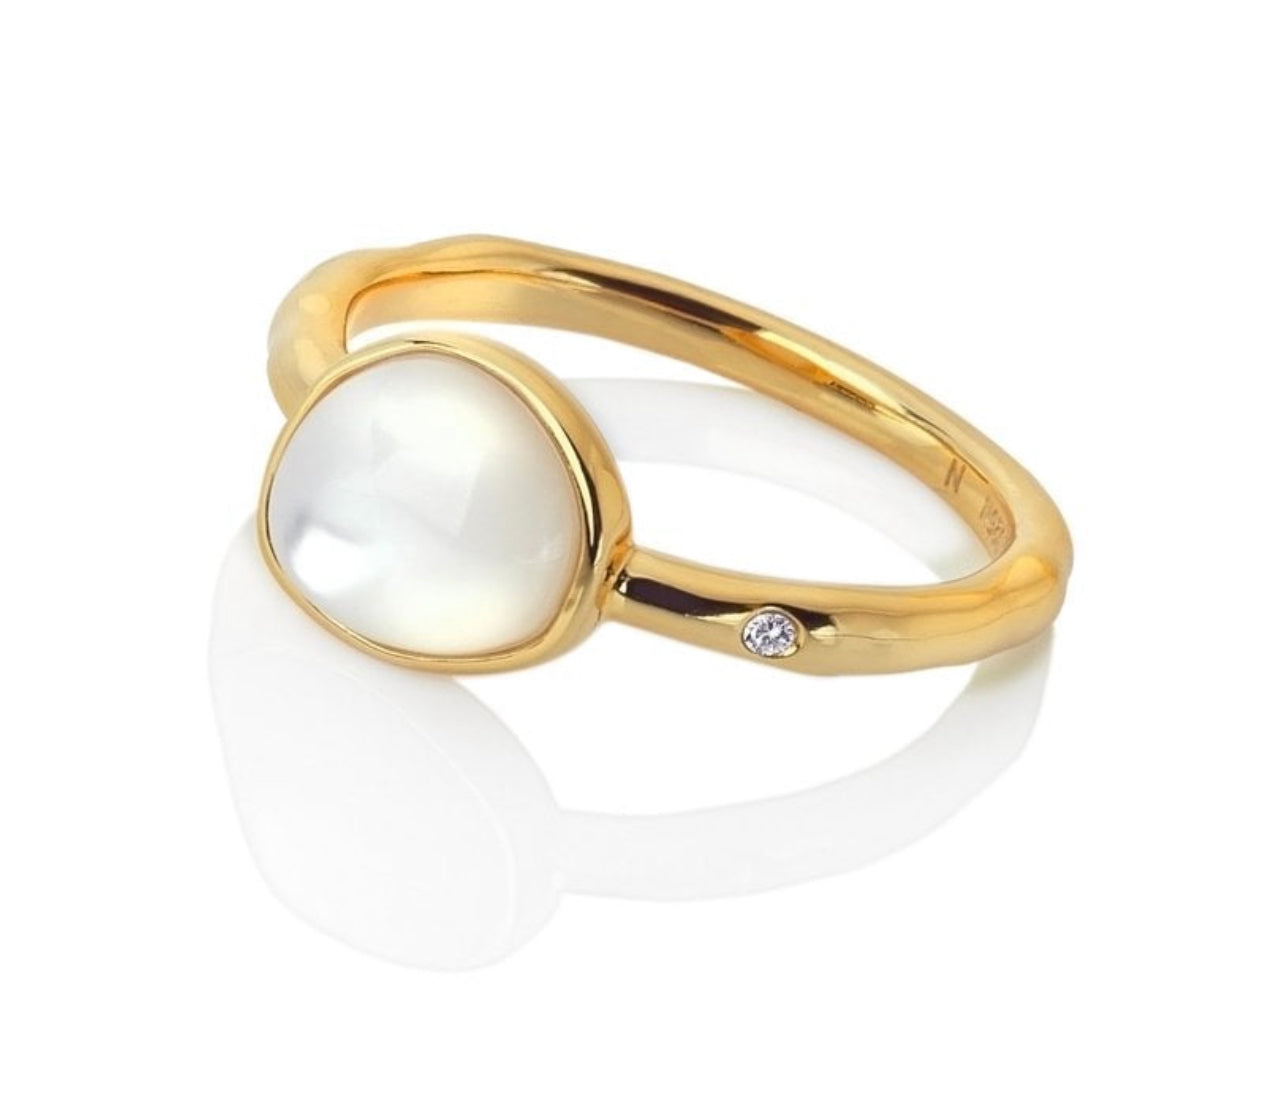 Jac Jossa Calm Mother Of Pearl Ring